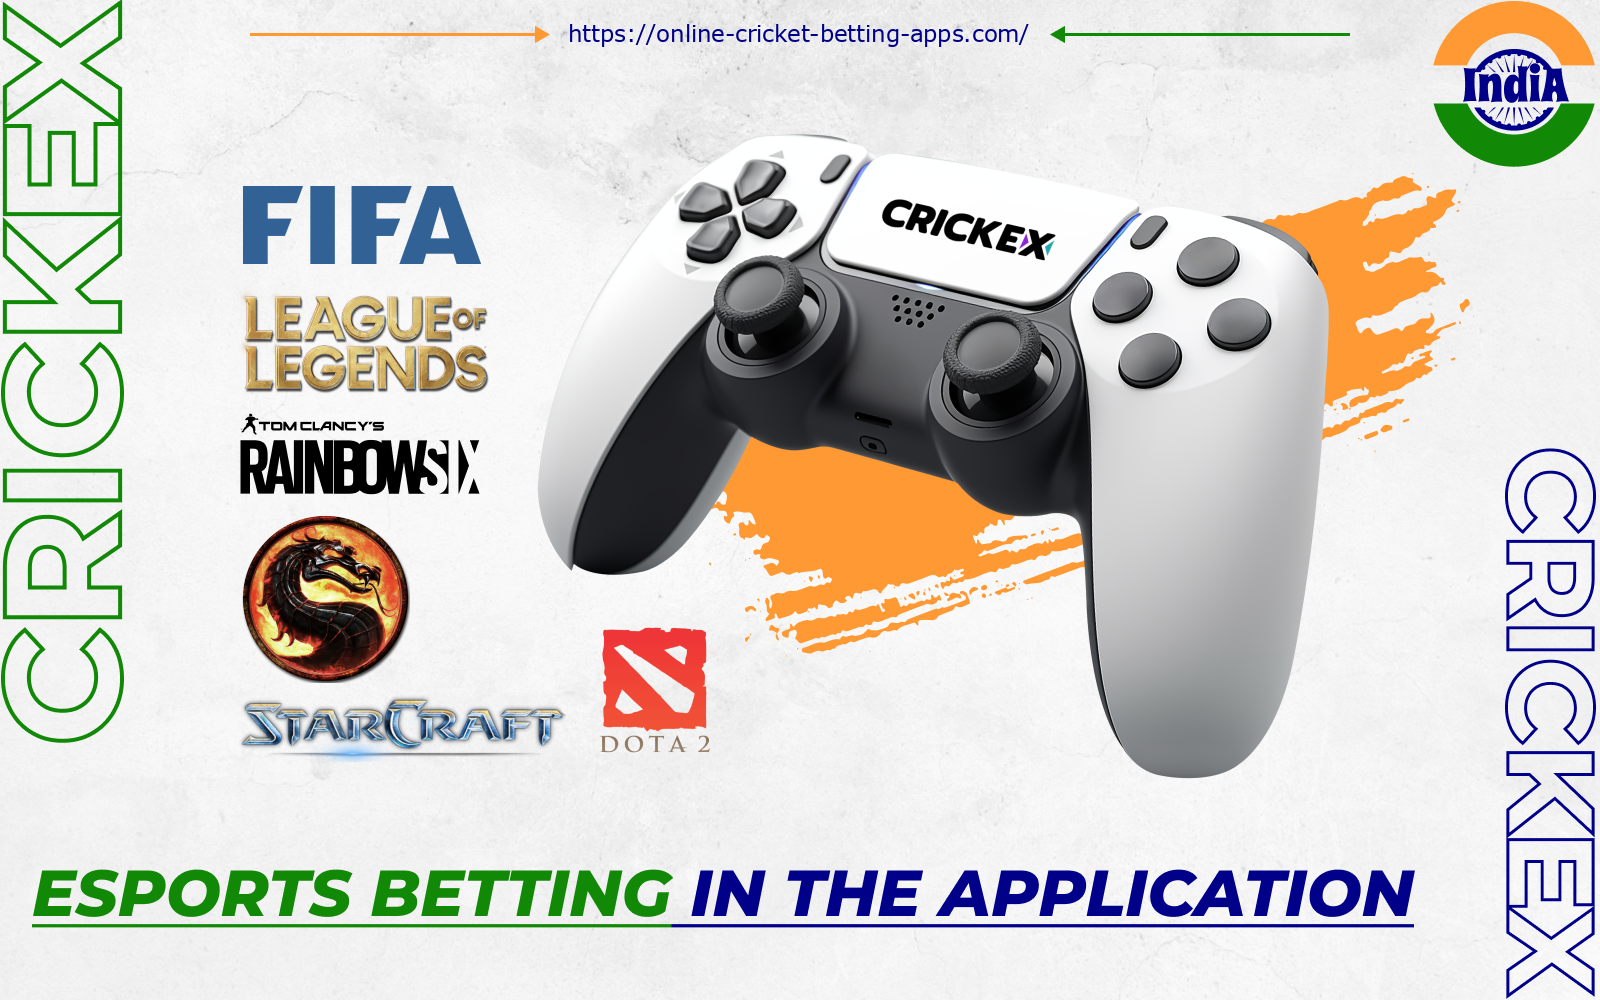 With the Crickex betting app, Indian users can bet on any official cyber sports match